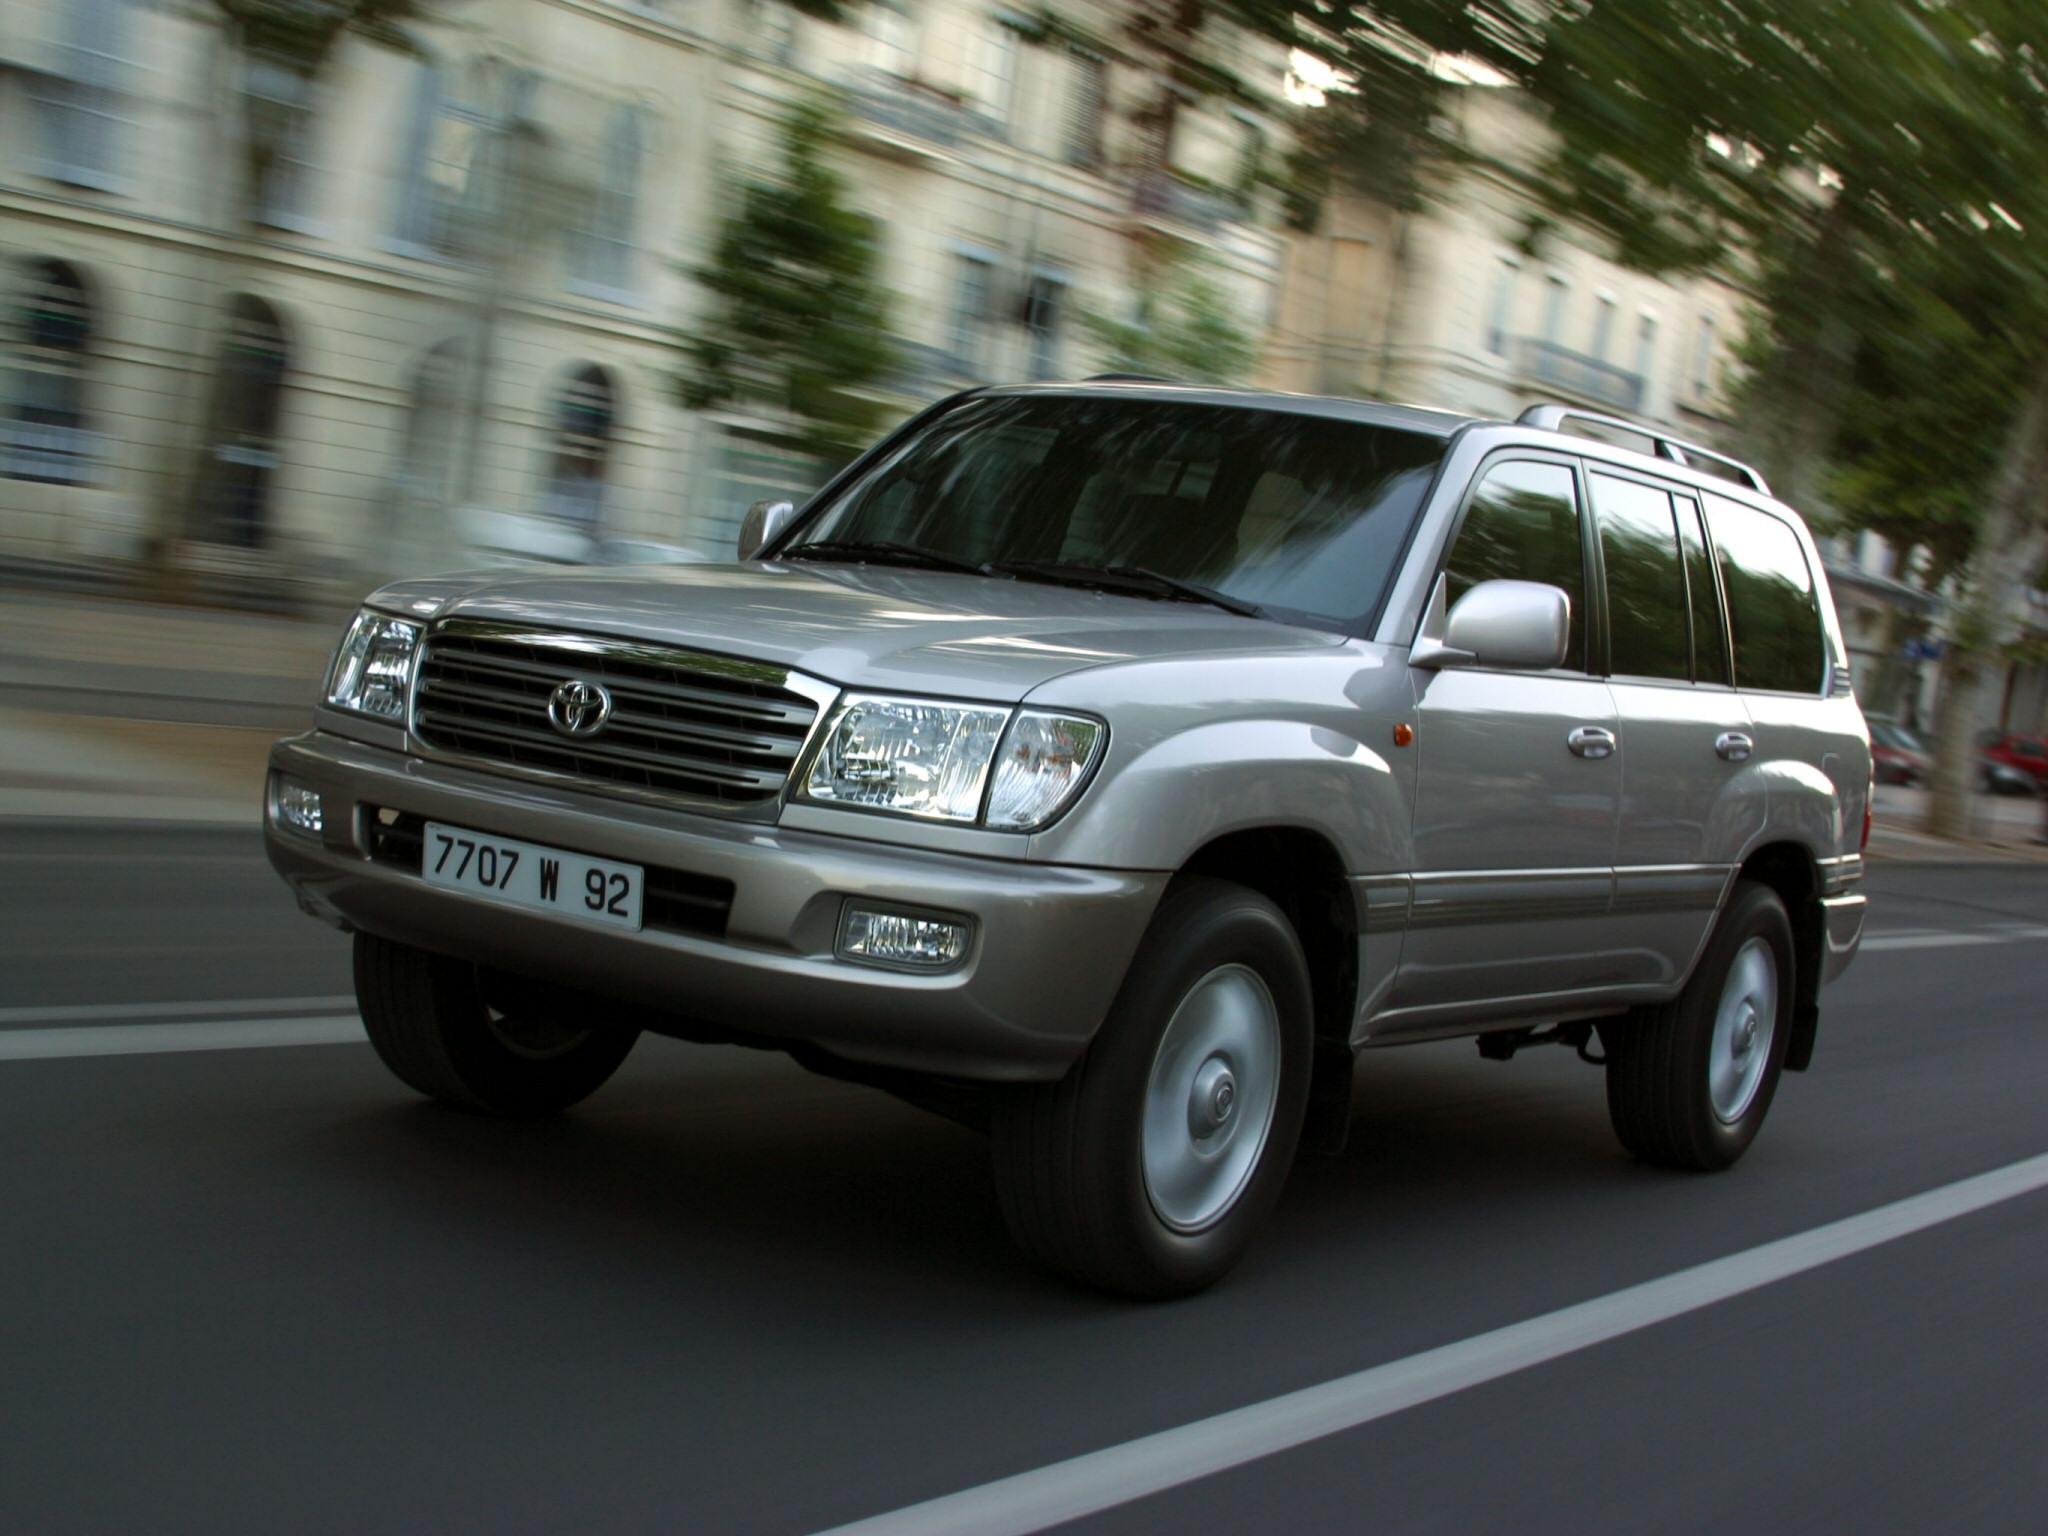 Toyota Land Cruiser 100 technical details, history, photos on Better ...